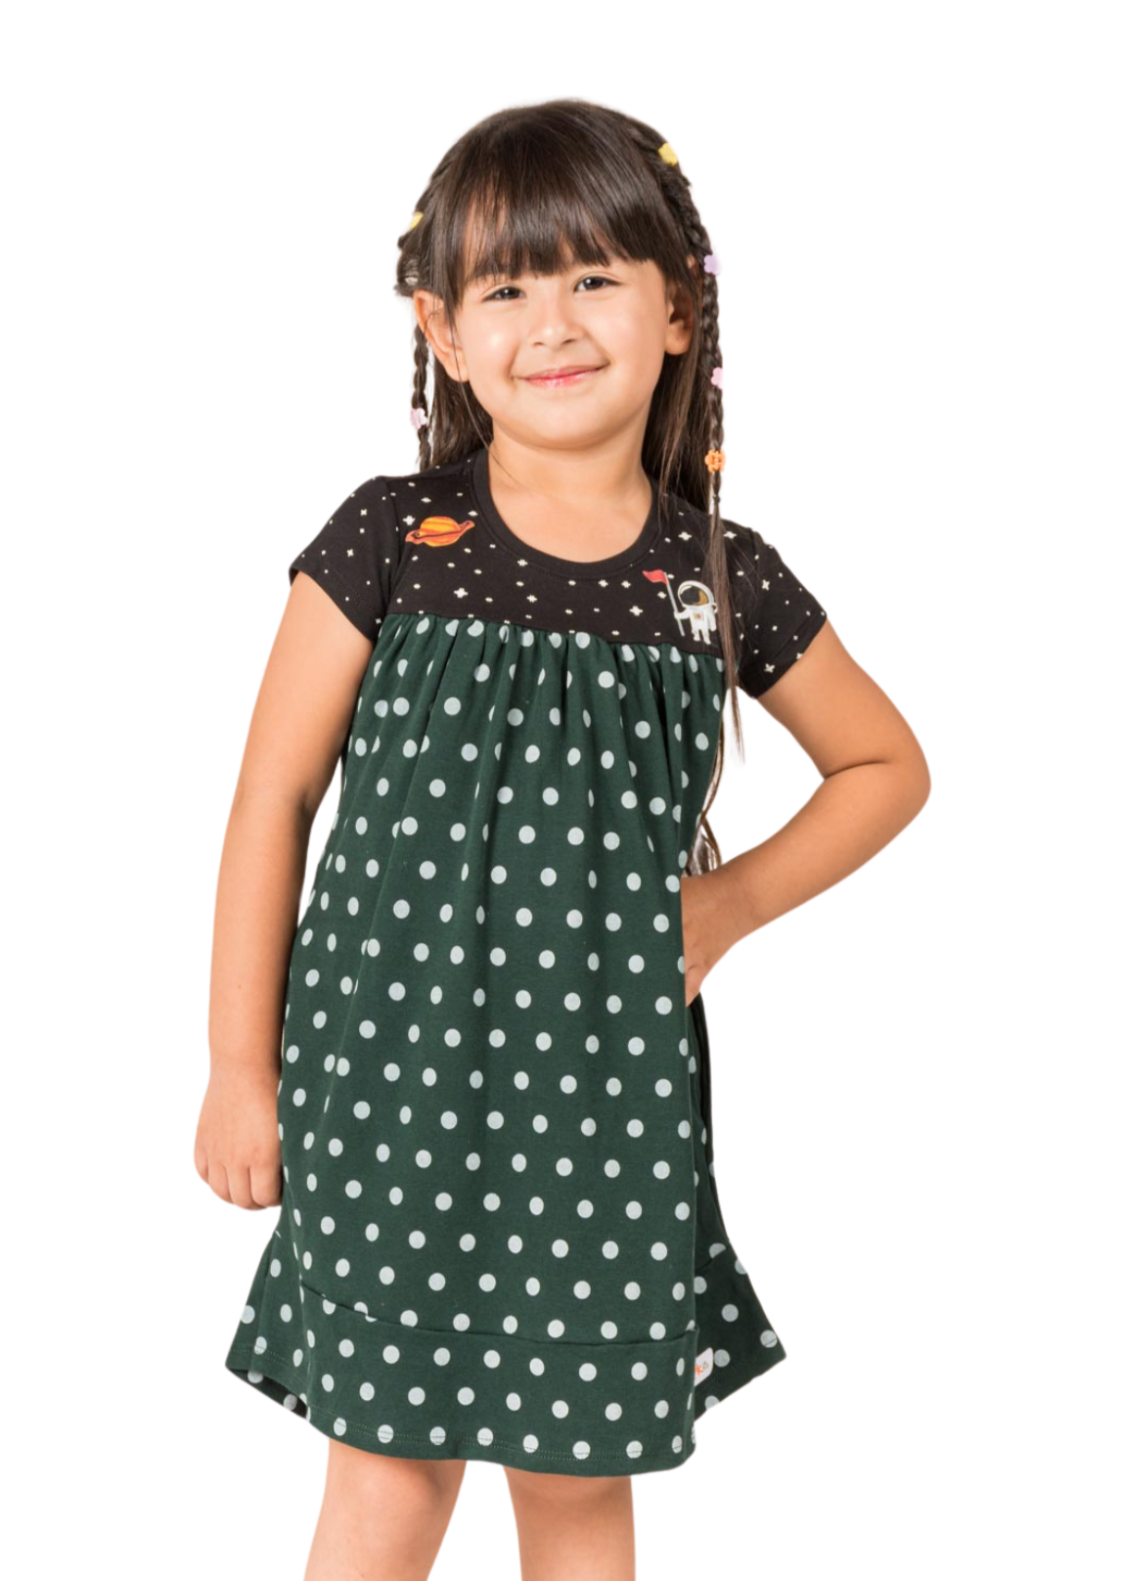 Space Dress with pockets, princess style made in Peruvian pima Cotton - Prisma Kiddos, girl dress, fashion for kids